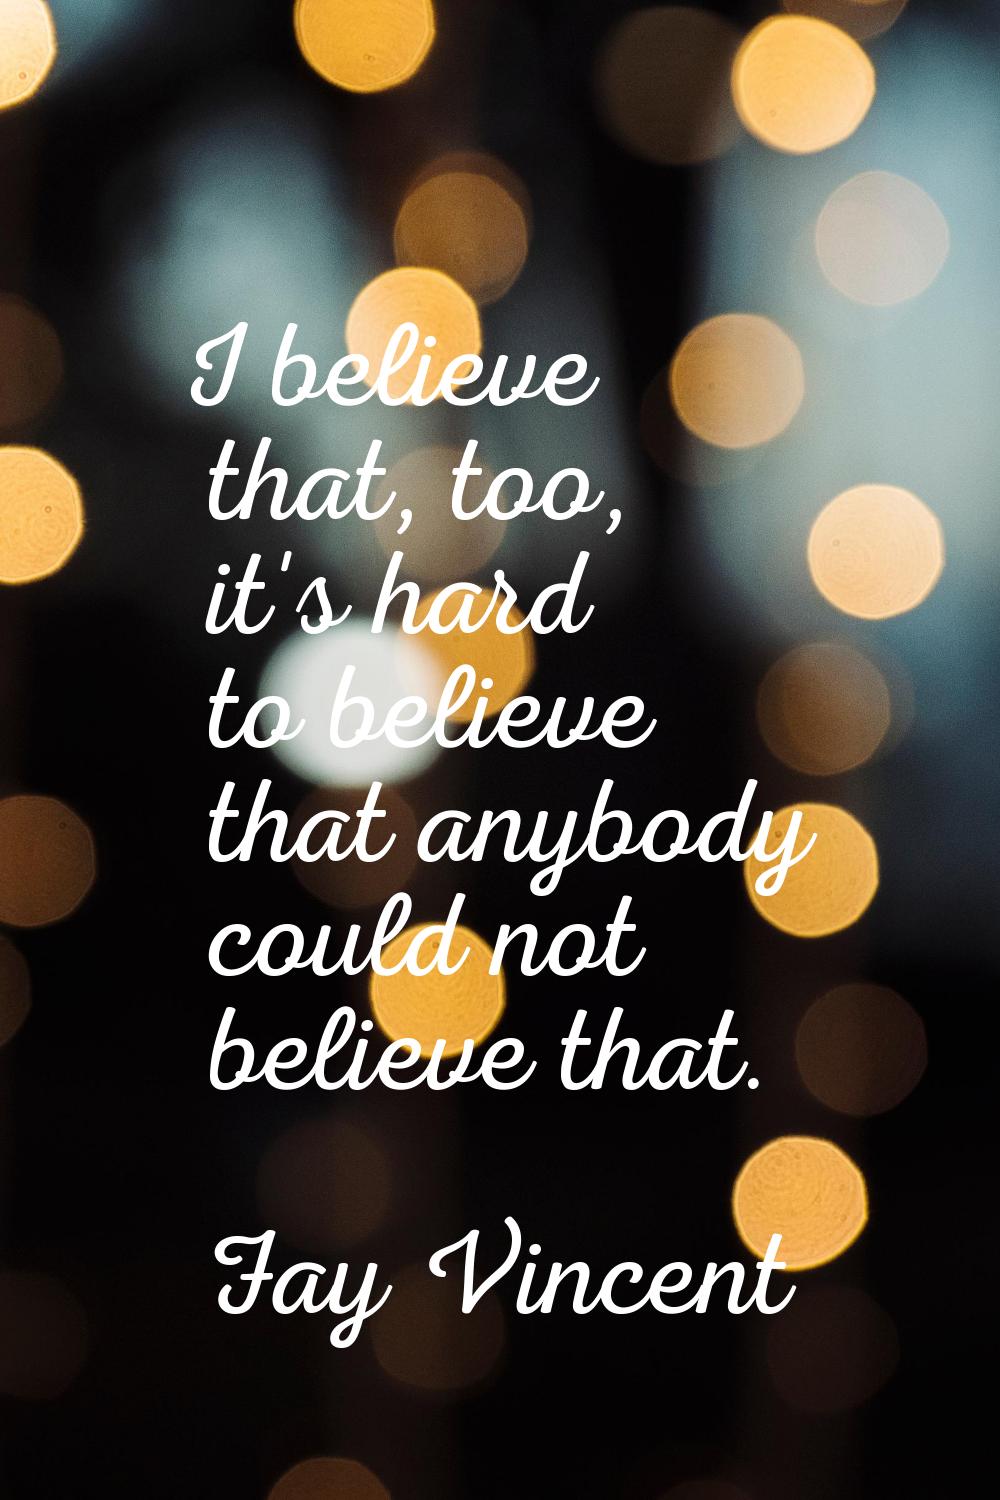 I believe that, too, it's hard to believe that anybody could not believe that.